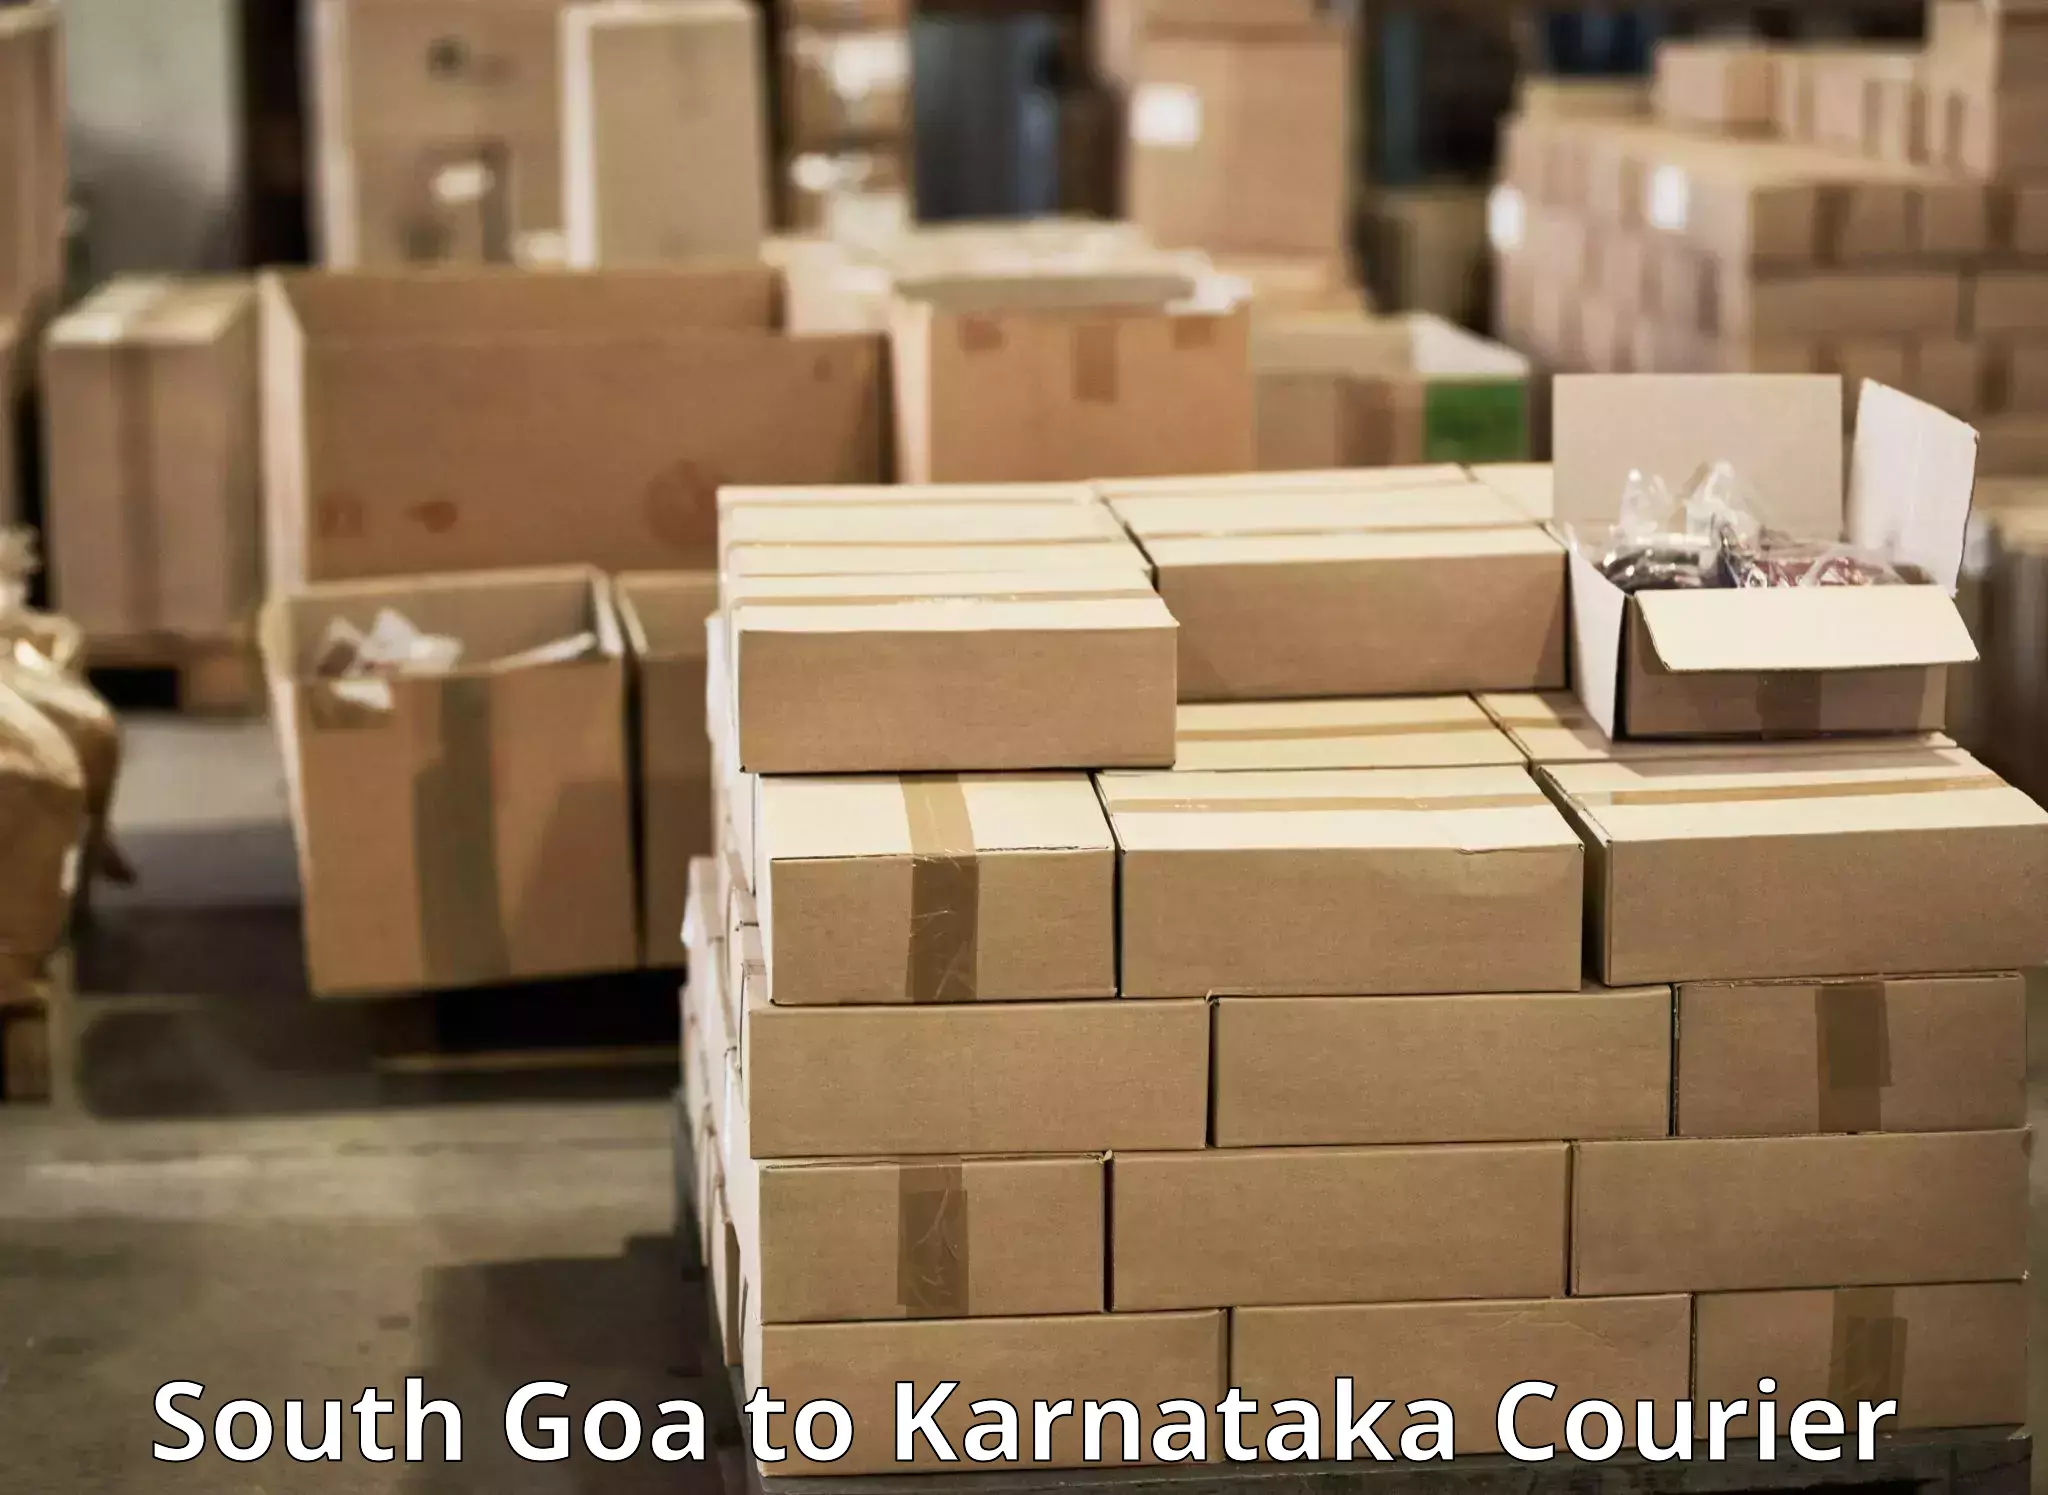 Nationwide delivery network South Goa to Yaragatti